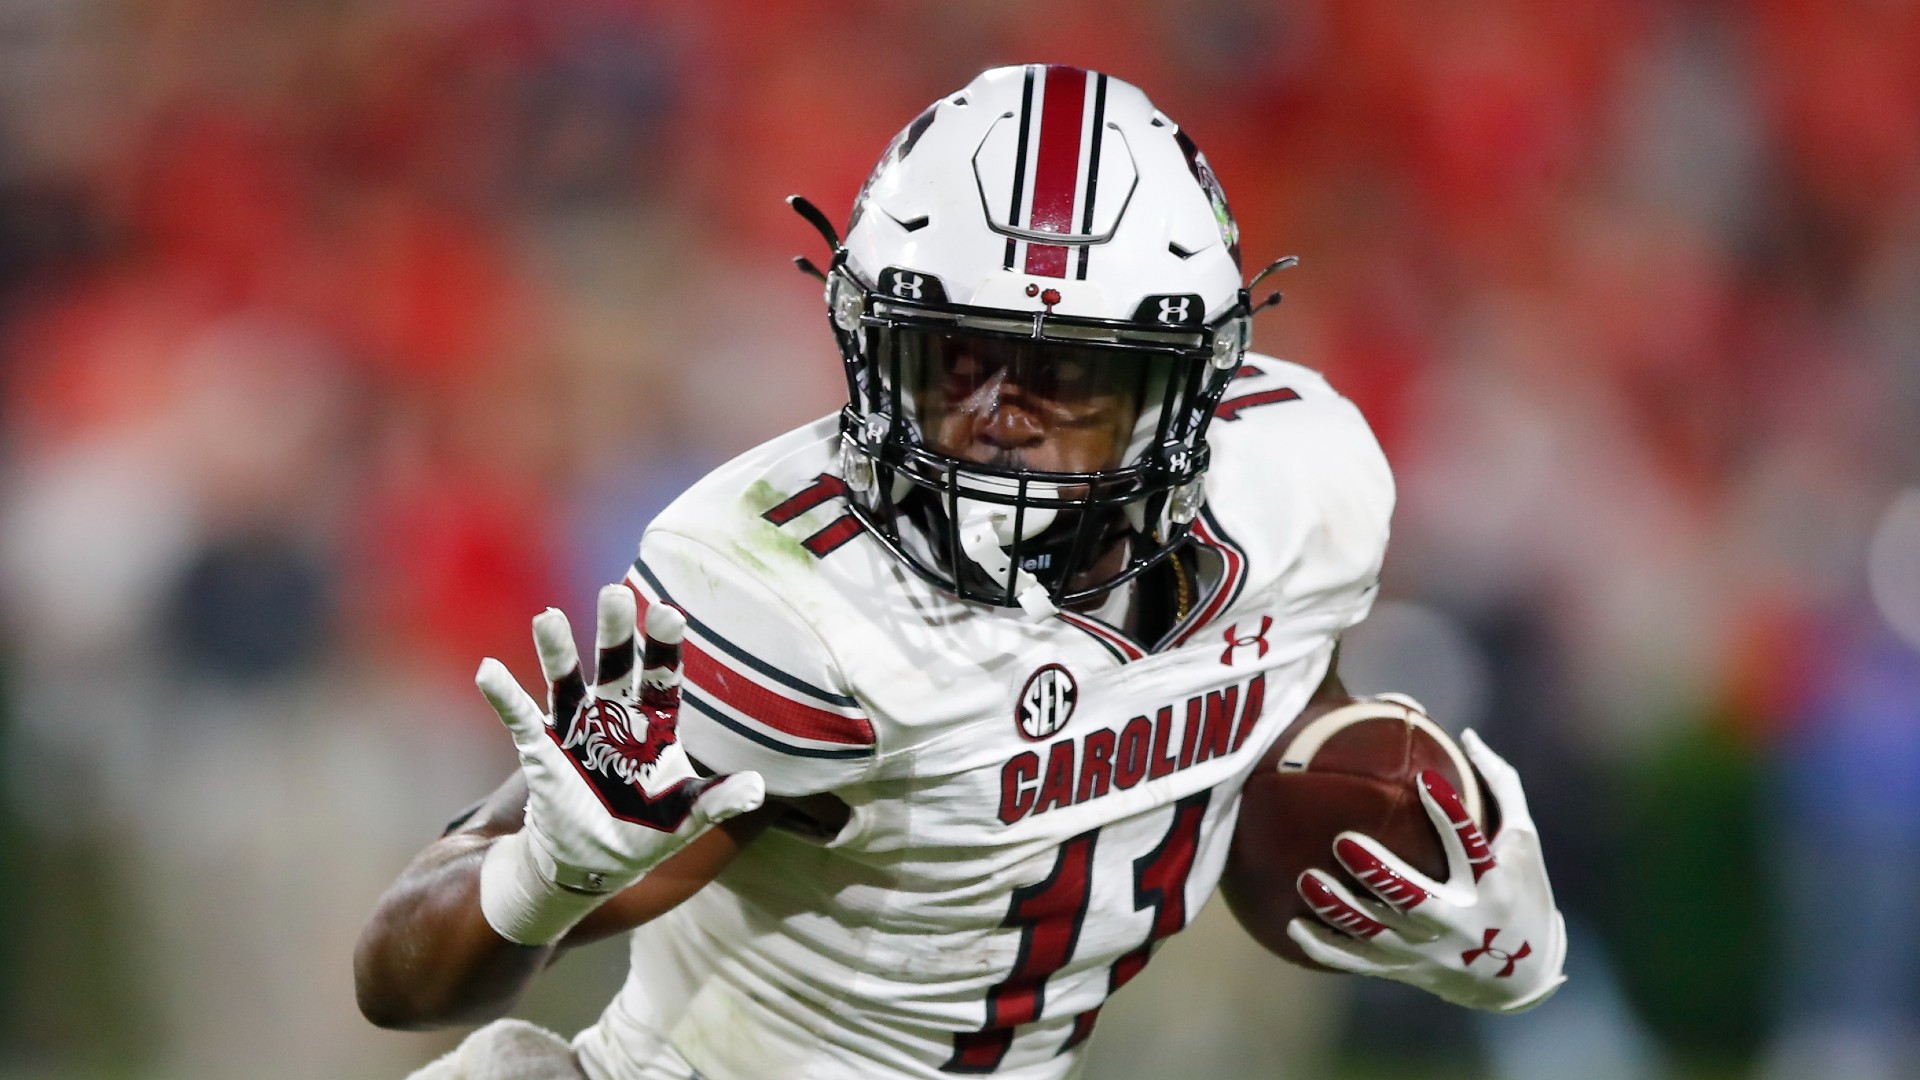 Troy vs. South Carolina Odds, Picks, Predictions: Can the Trojans Keep it Close (Saturday, Oct. 2) article feature image